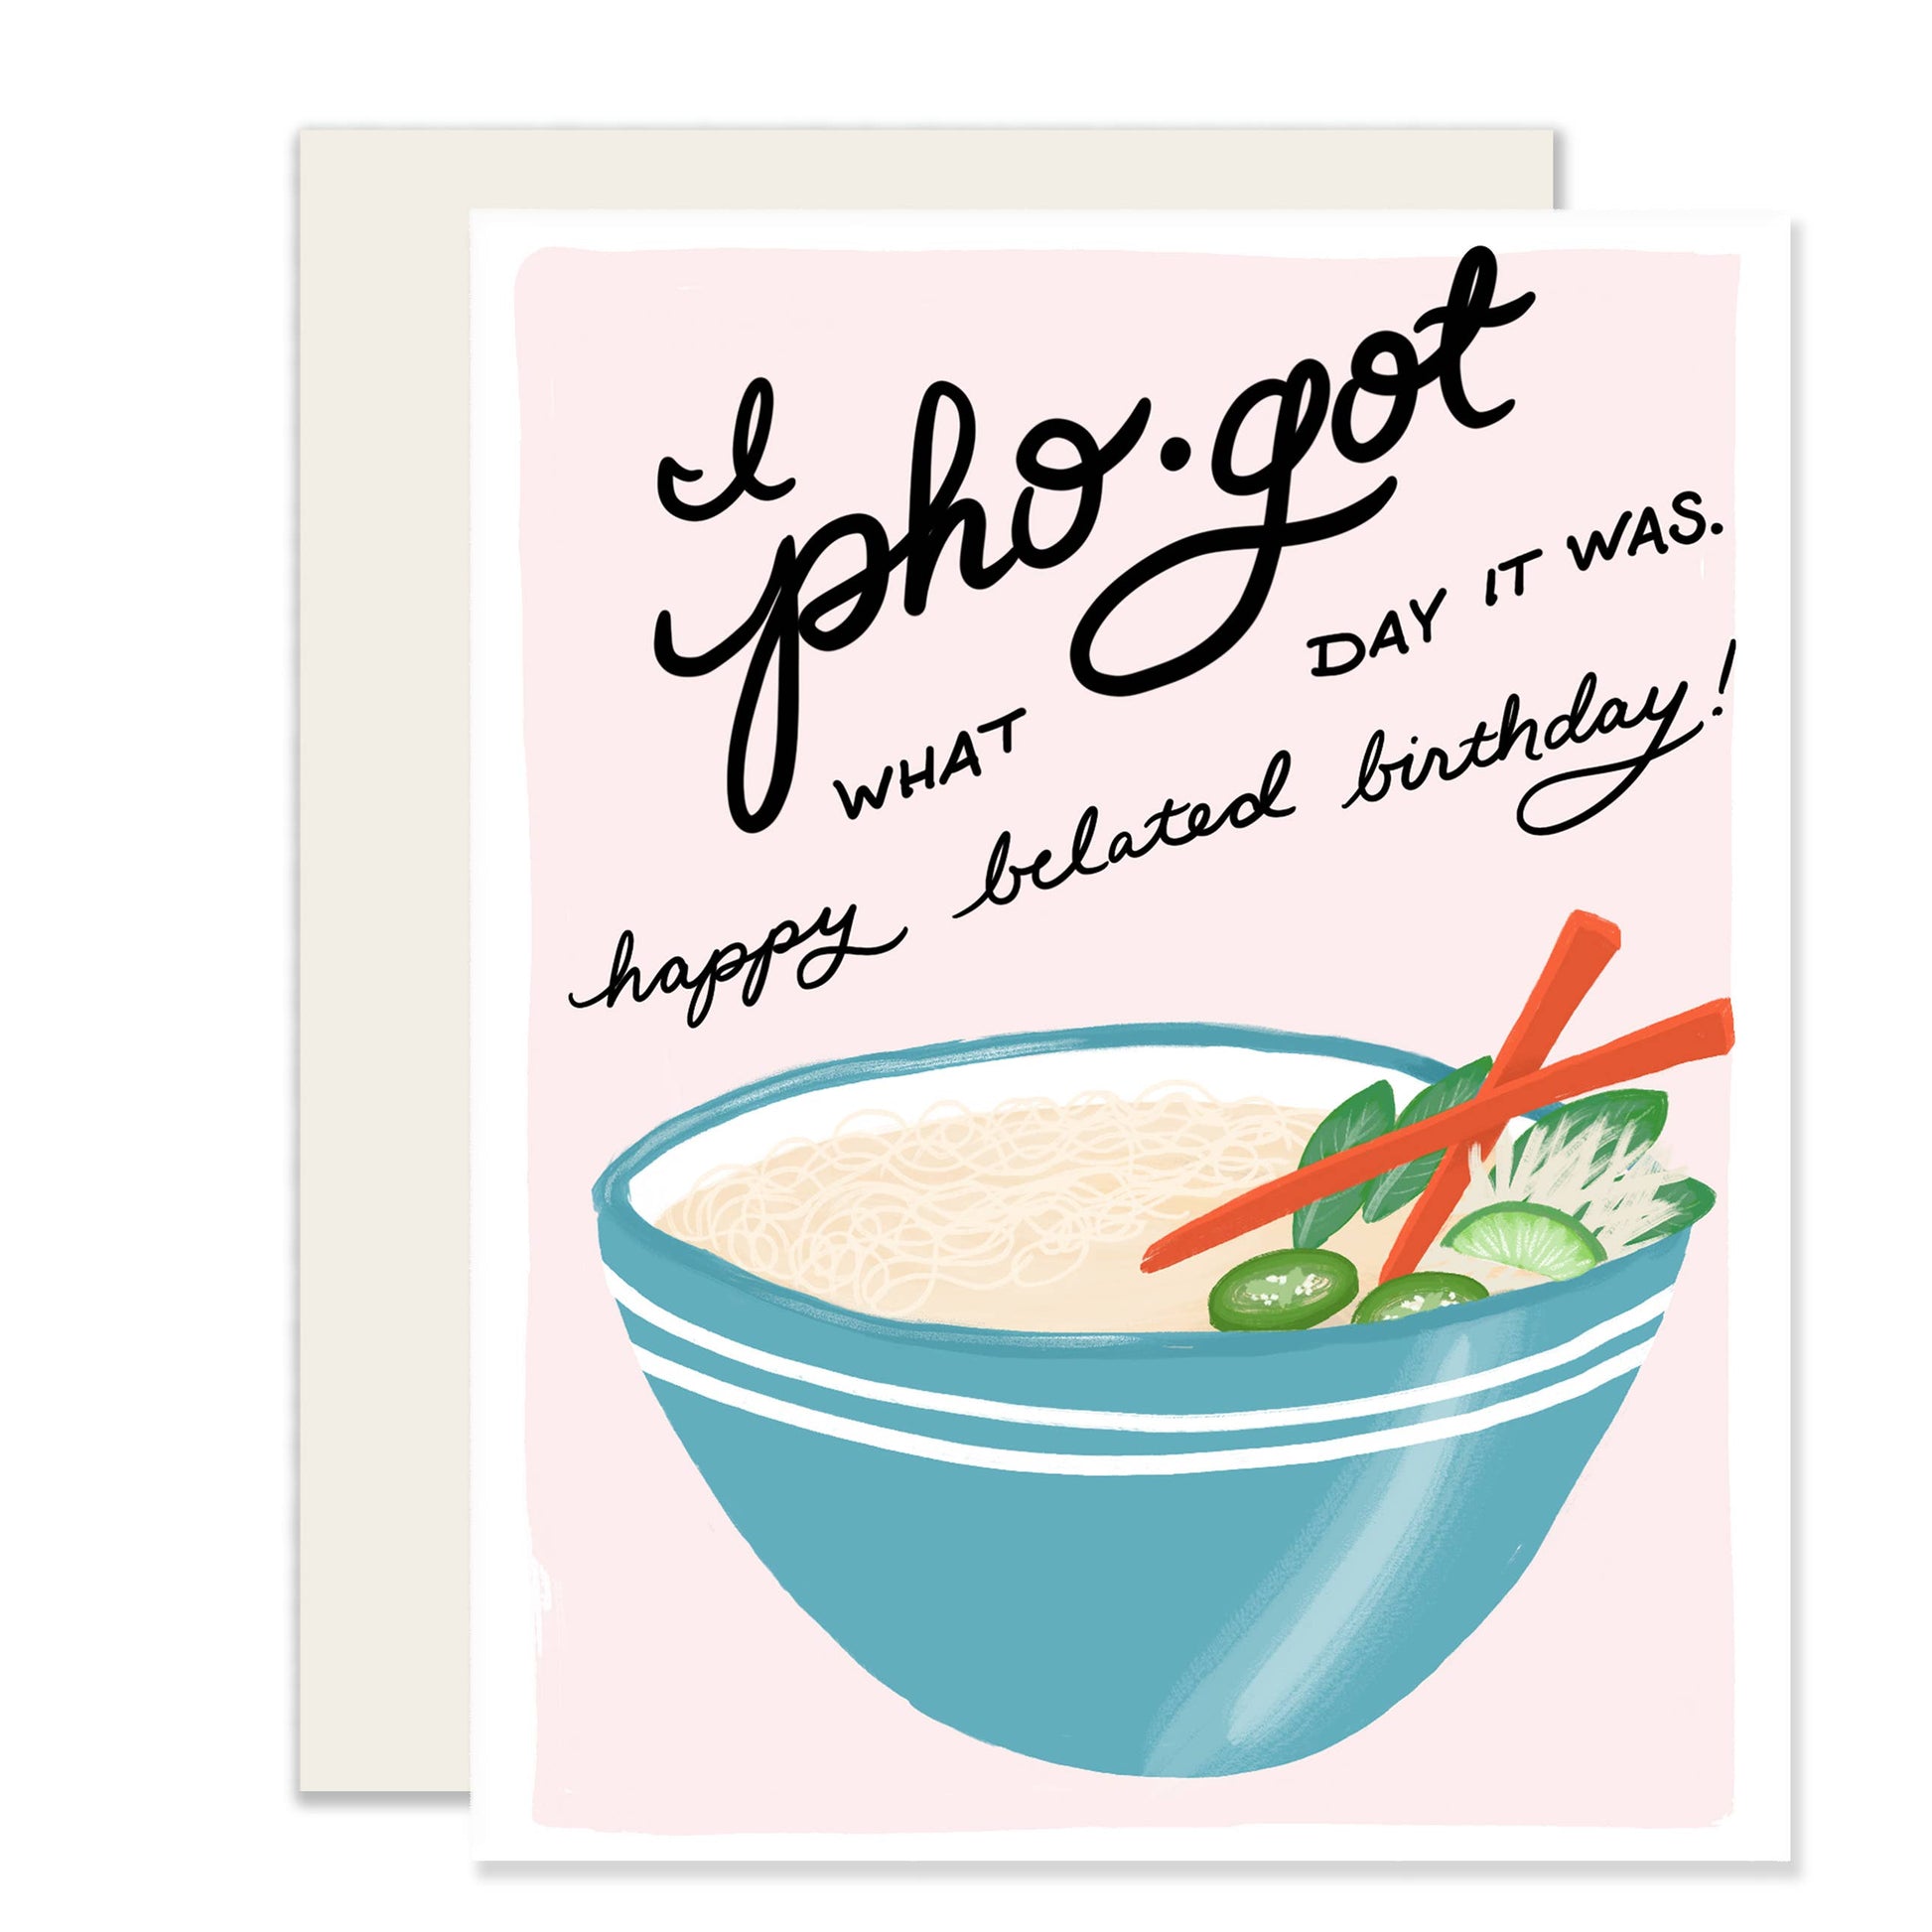 Pho belated birthday greeting card that reads "I pho-got what day it was. Happy belated birthday!"